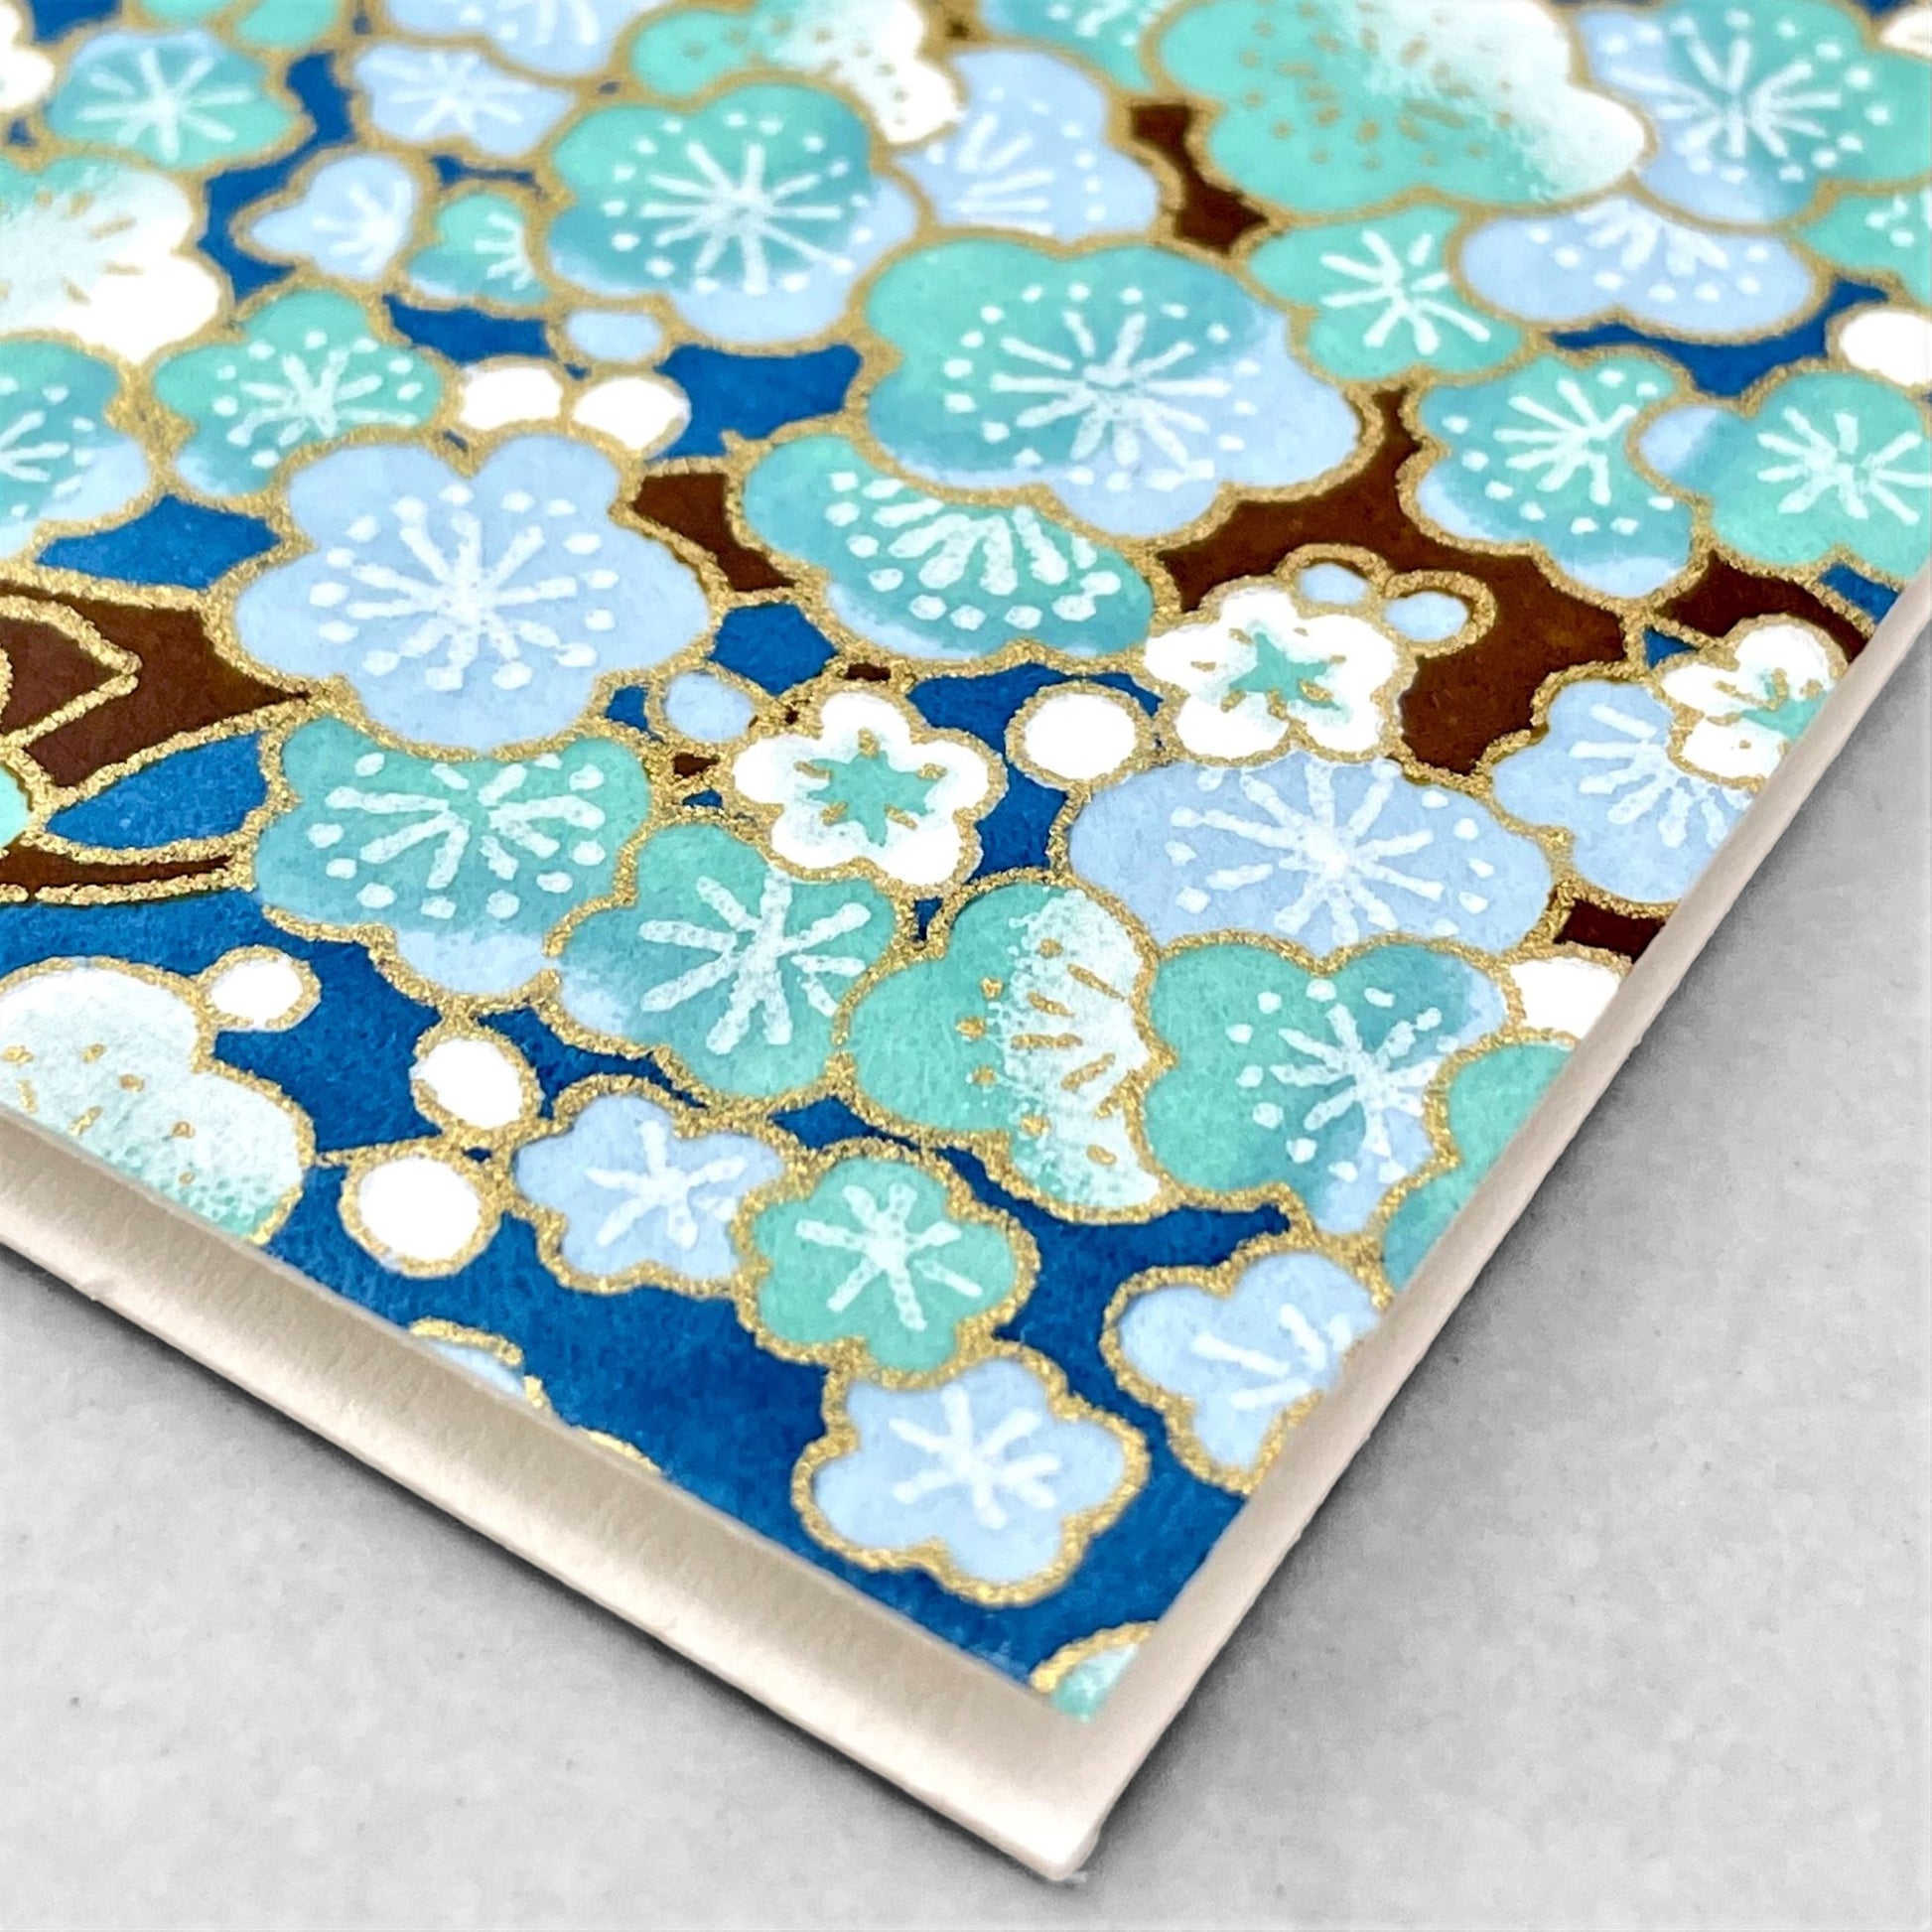 japanese silk-screen printed greetings card with a pattern of pale blue and white blossom on a blue backdrop by Esmie